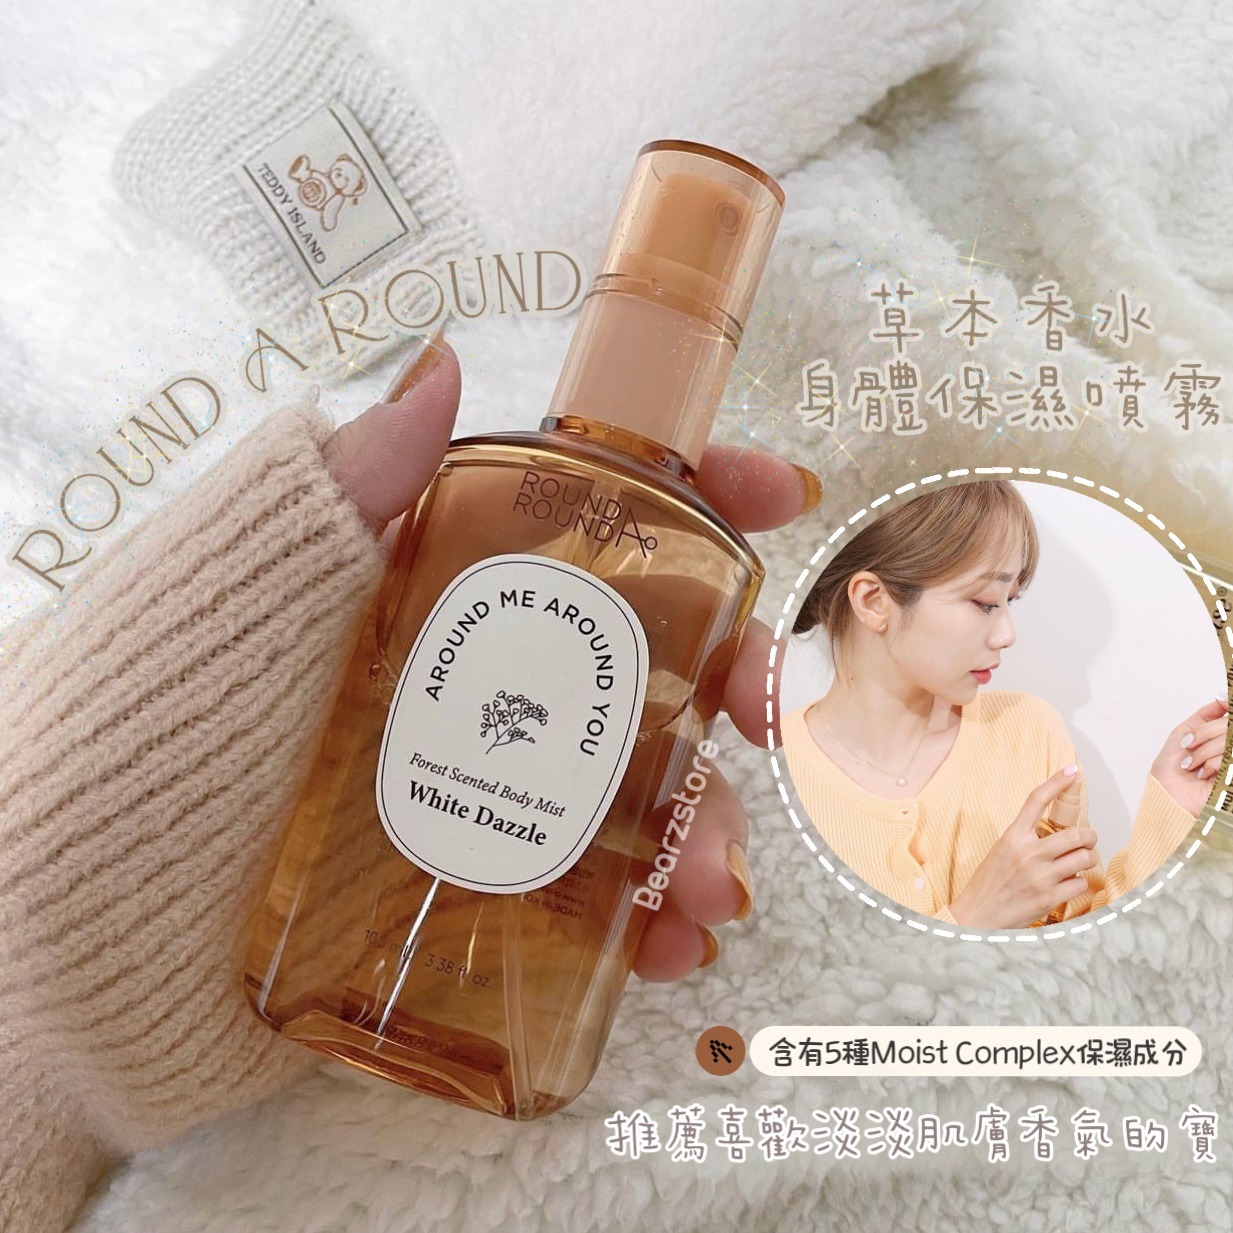 Round A Round 草本香水身體保濕噴霧 Forest Scented Body Mist🌿